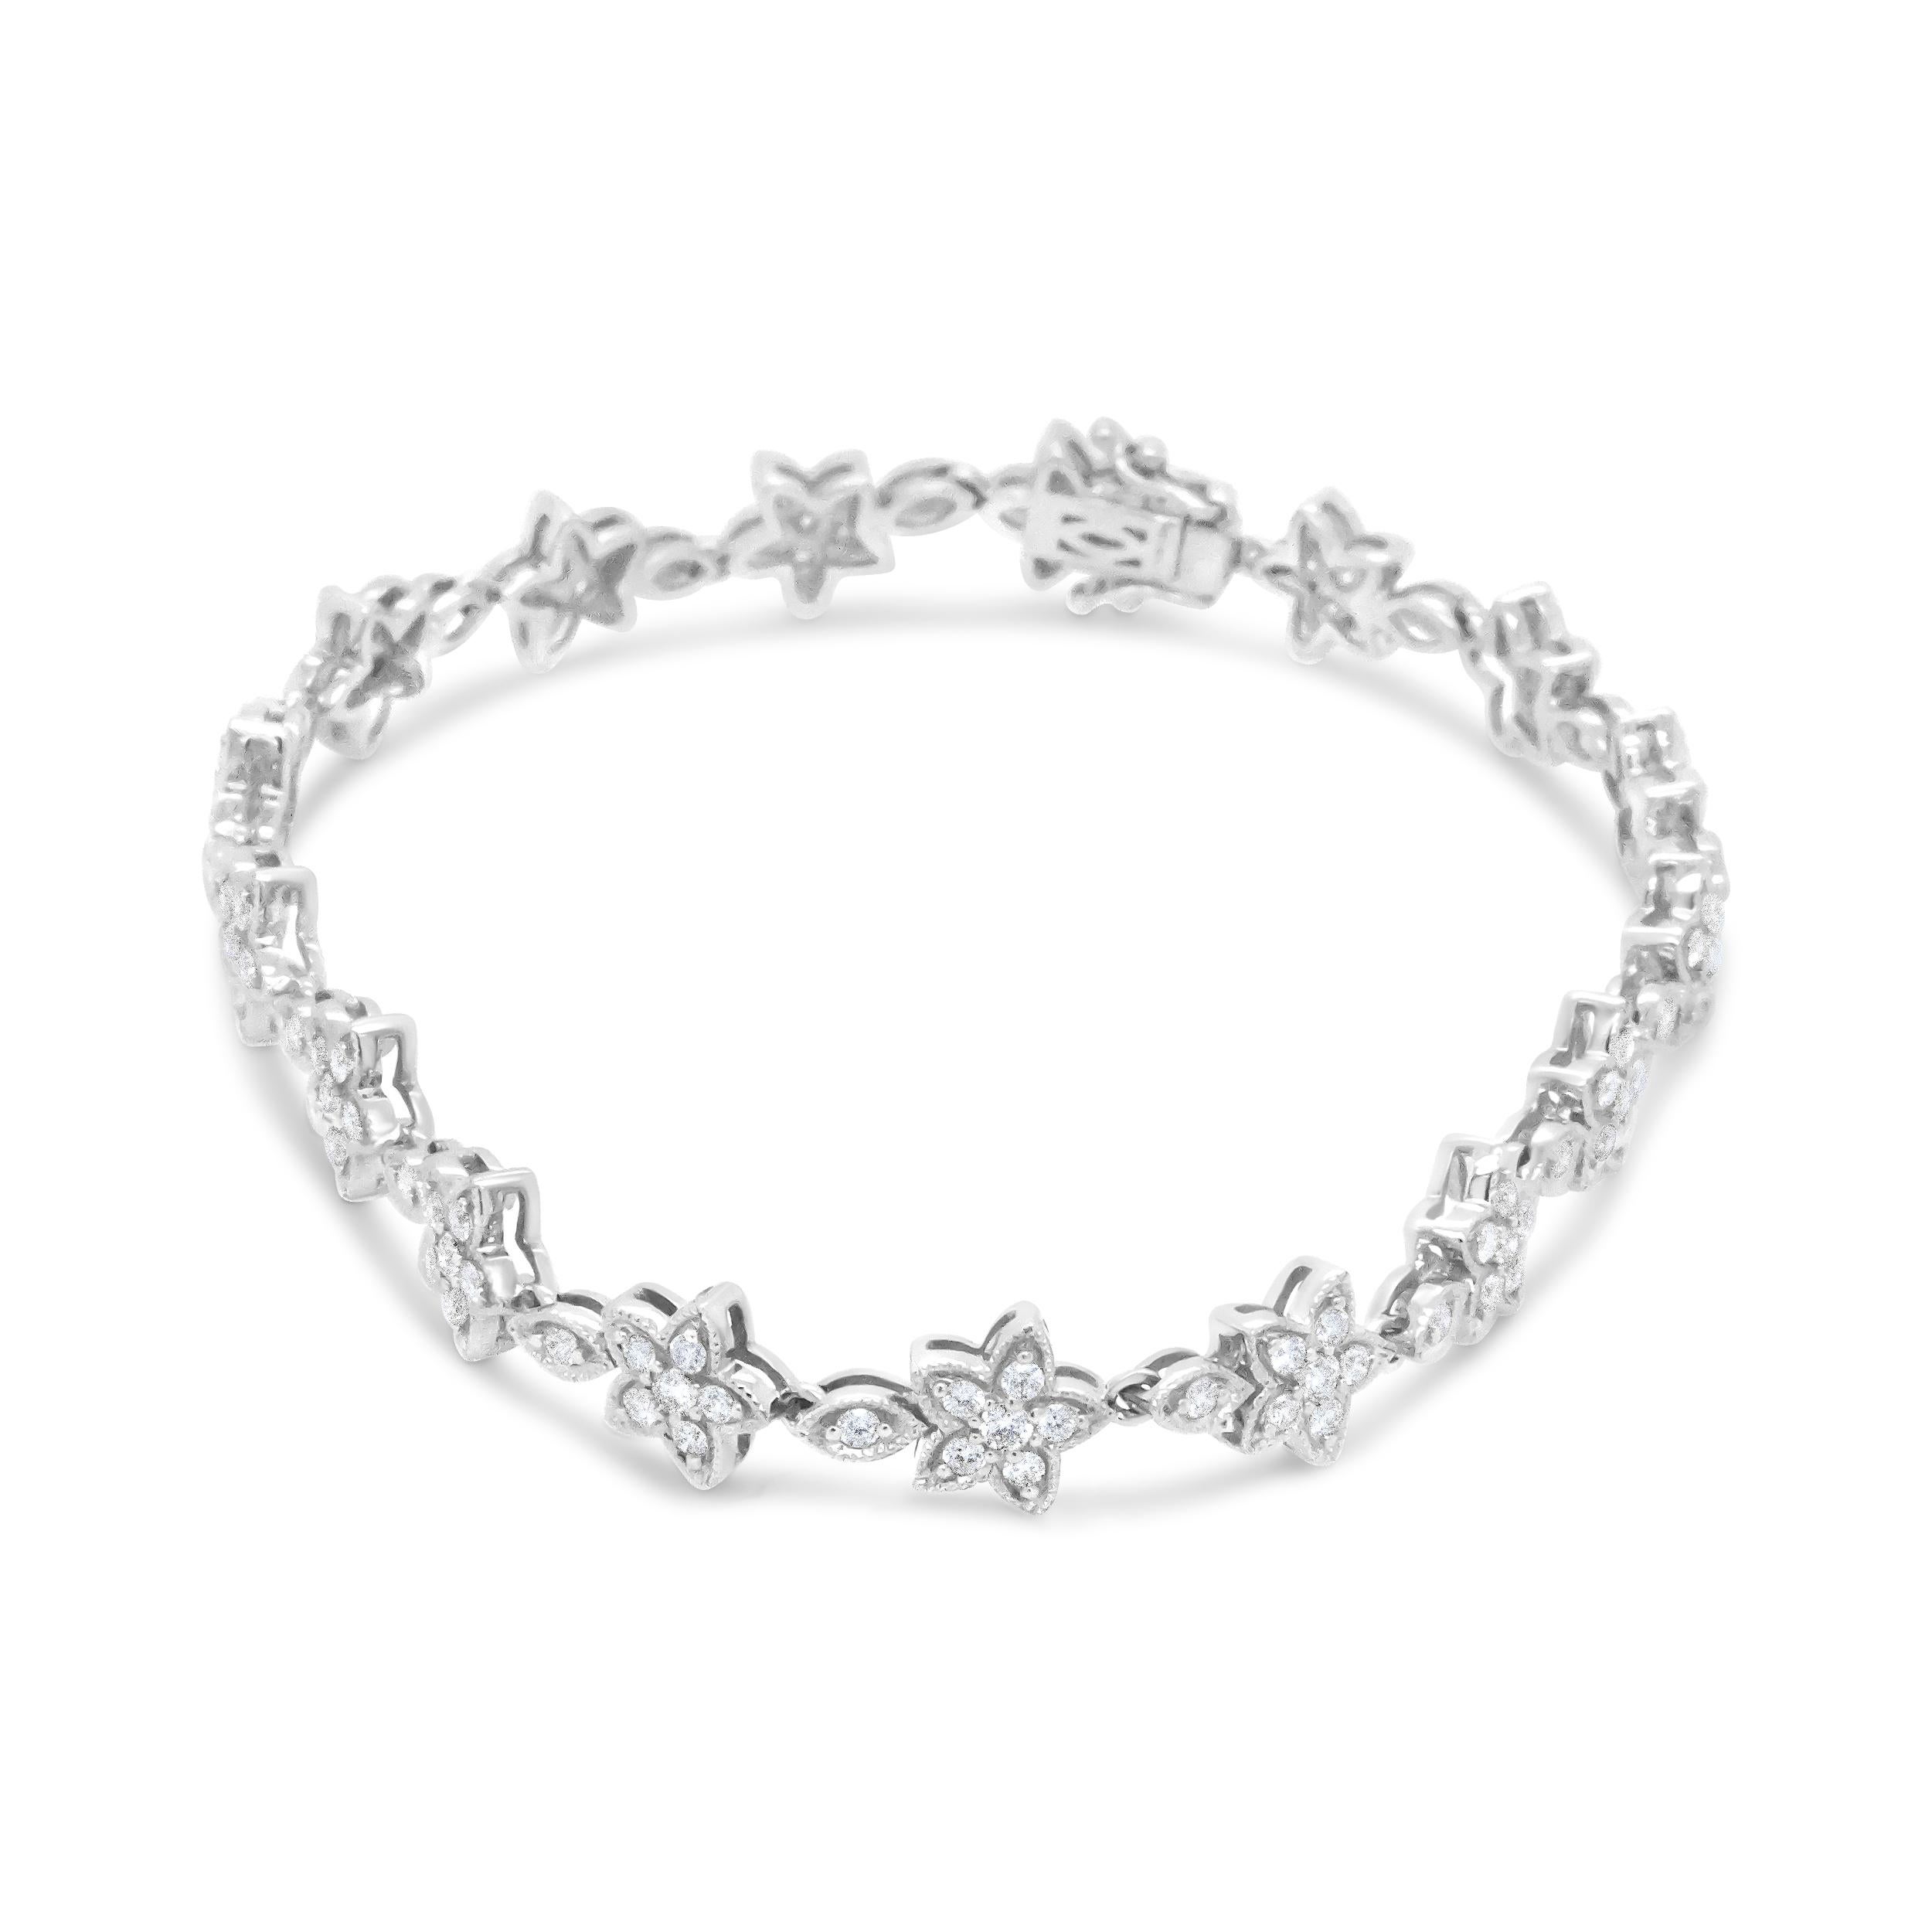 Wear the romance of a moonlit garden on your wrist with this gorgeous link bracelet featured 14k white gold with brilliant white diamonds arranged in prong settings. This fashion bracelet is arranged in a flower blossom silhouette, with diamonds